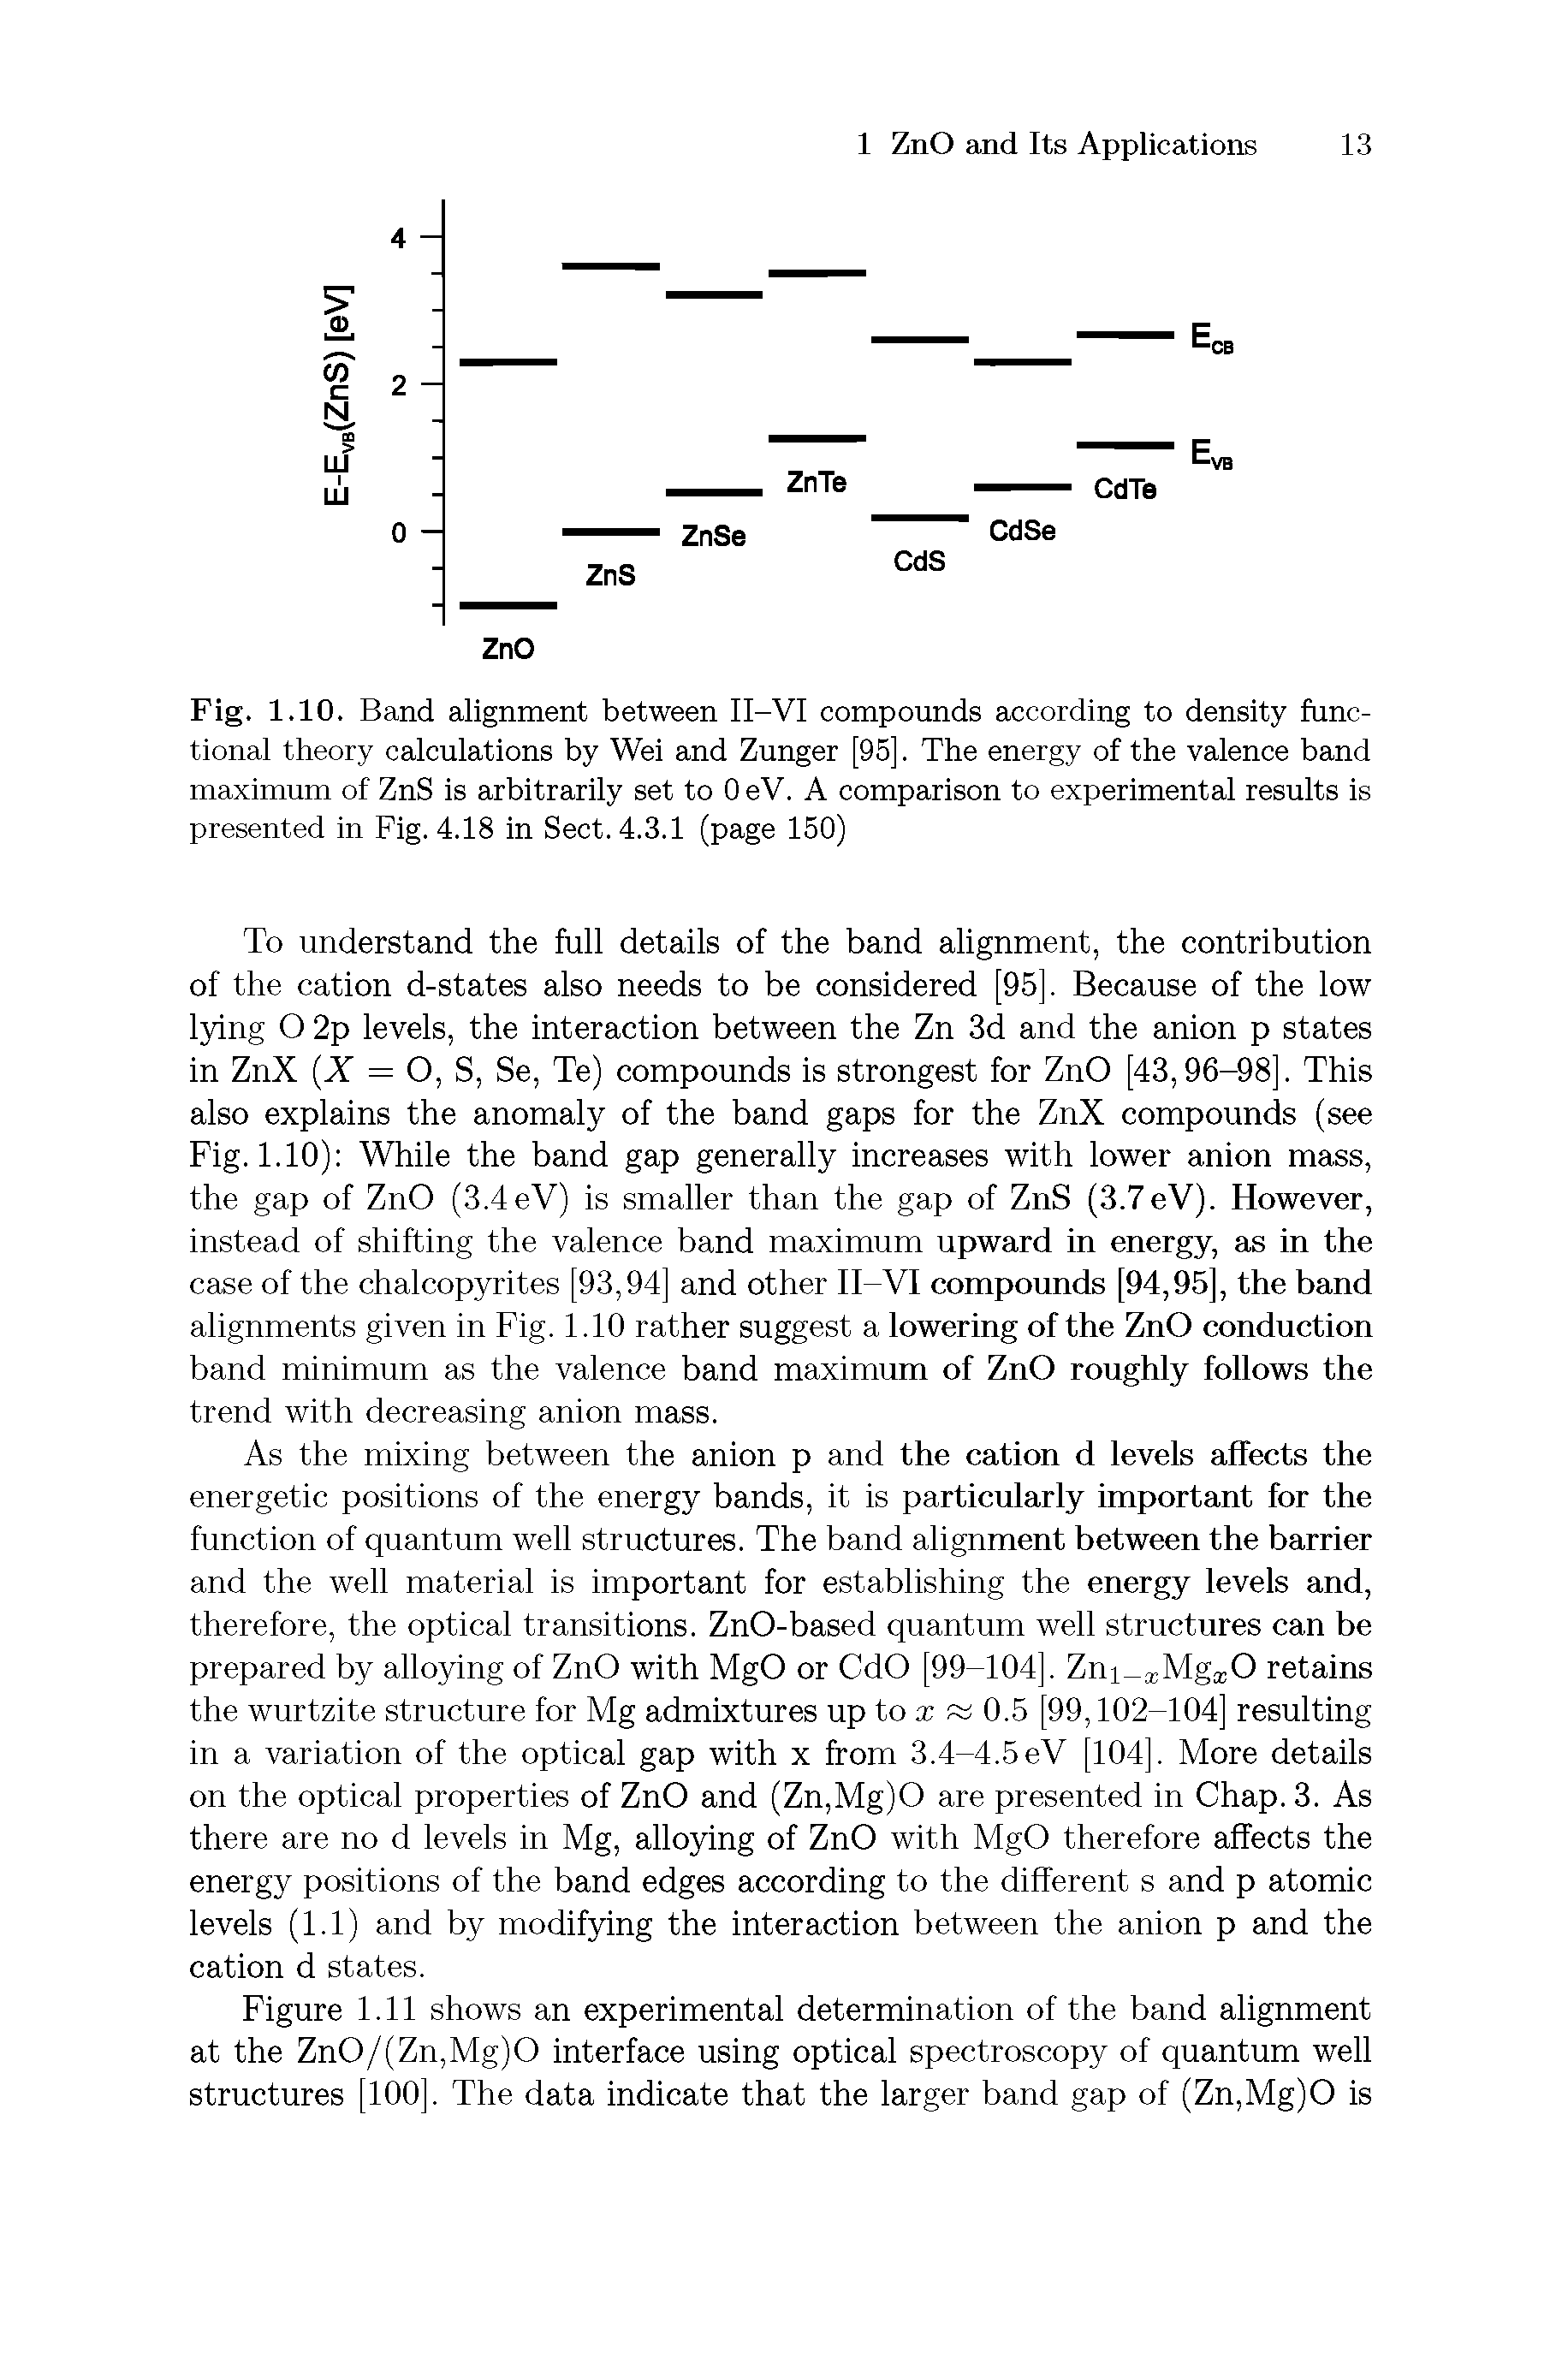 Fig. 1.10. Band alignment between II-VI compounds according to density functional theory calculations by Wei and Zunger [95]. The energy of the valence band maximum of ZnS is arbitrarily set to 0 eV. A comparison to experimental results is presented in Fig. 4.18 in Sect. 4.3.1 (page 150)...